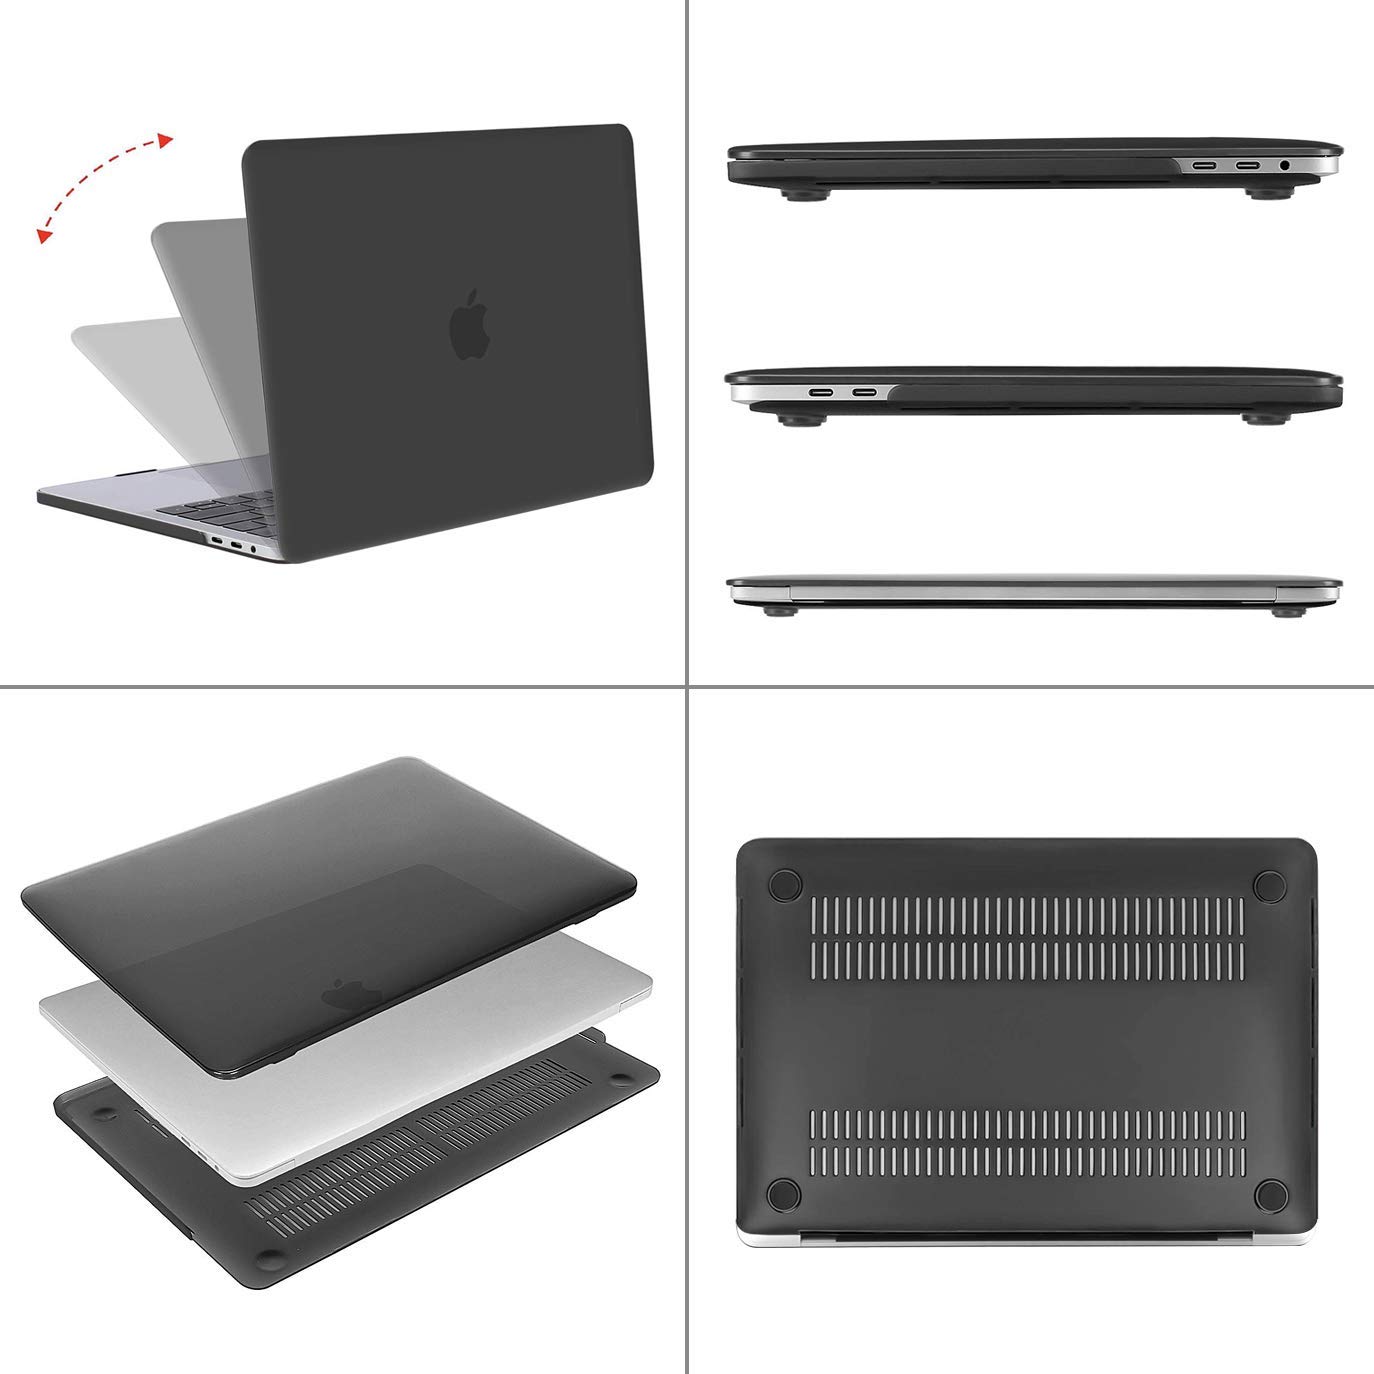 HF-MBP-BSC: MacBook Pro 13 Case 2019 2018 2017 2016 Release A2159 A1989 A1706 A1708, Plastic Hard Case Shell Cover Compatible with MacBook Pro 13 Inch with/Without Touch Bar and Touch ID, Black - Click Image to Close